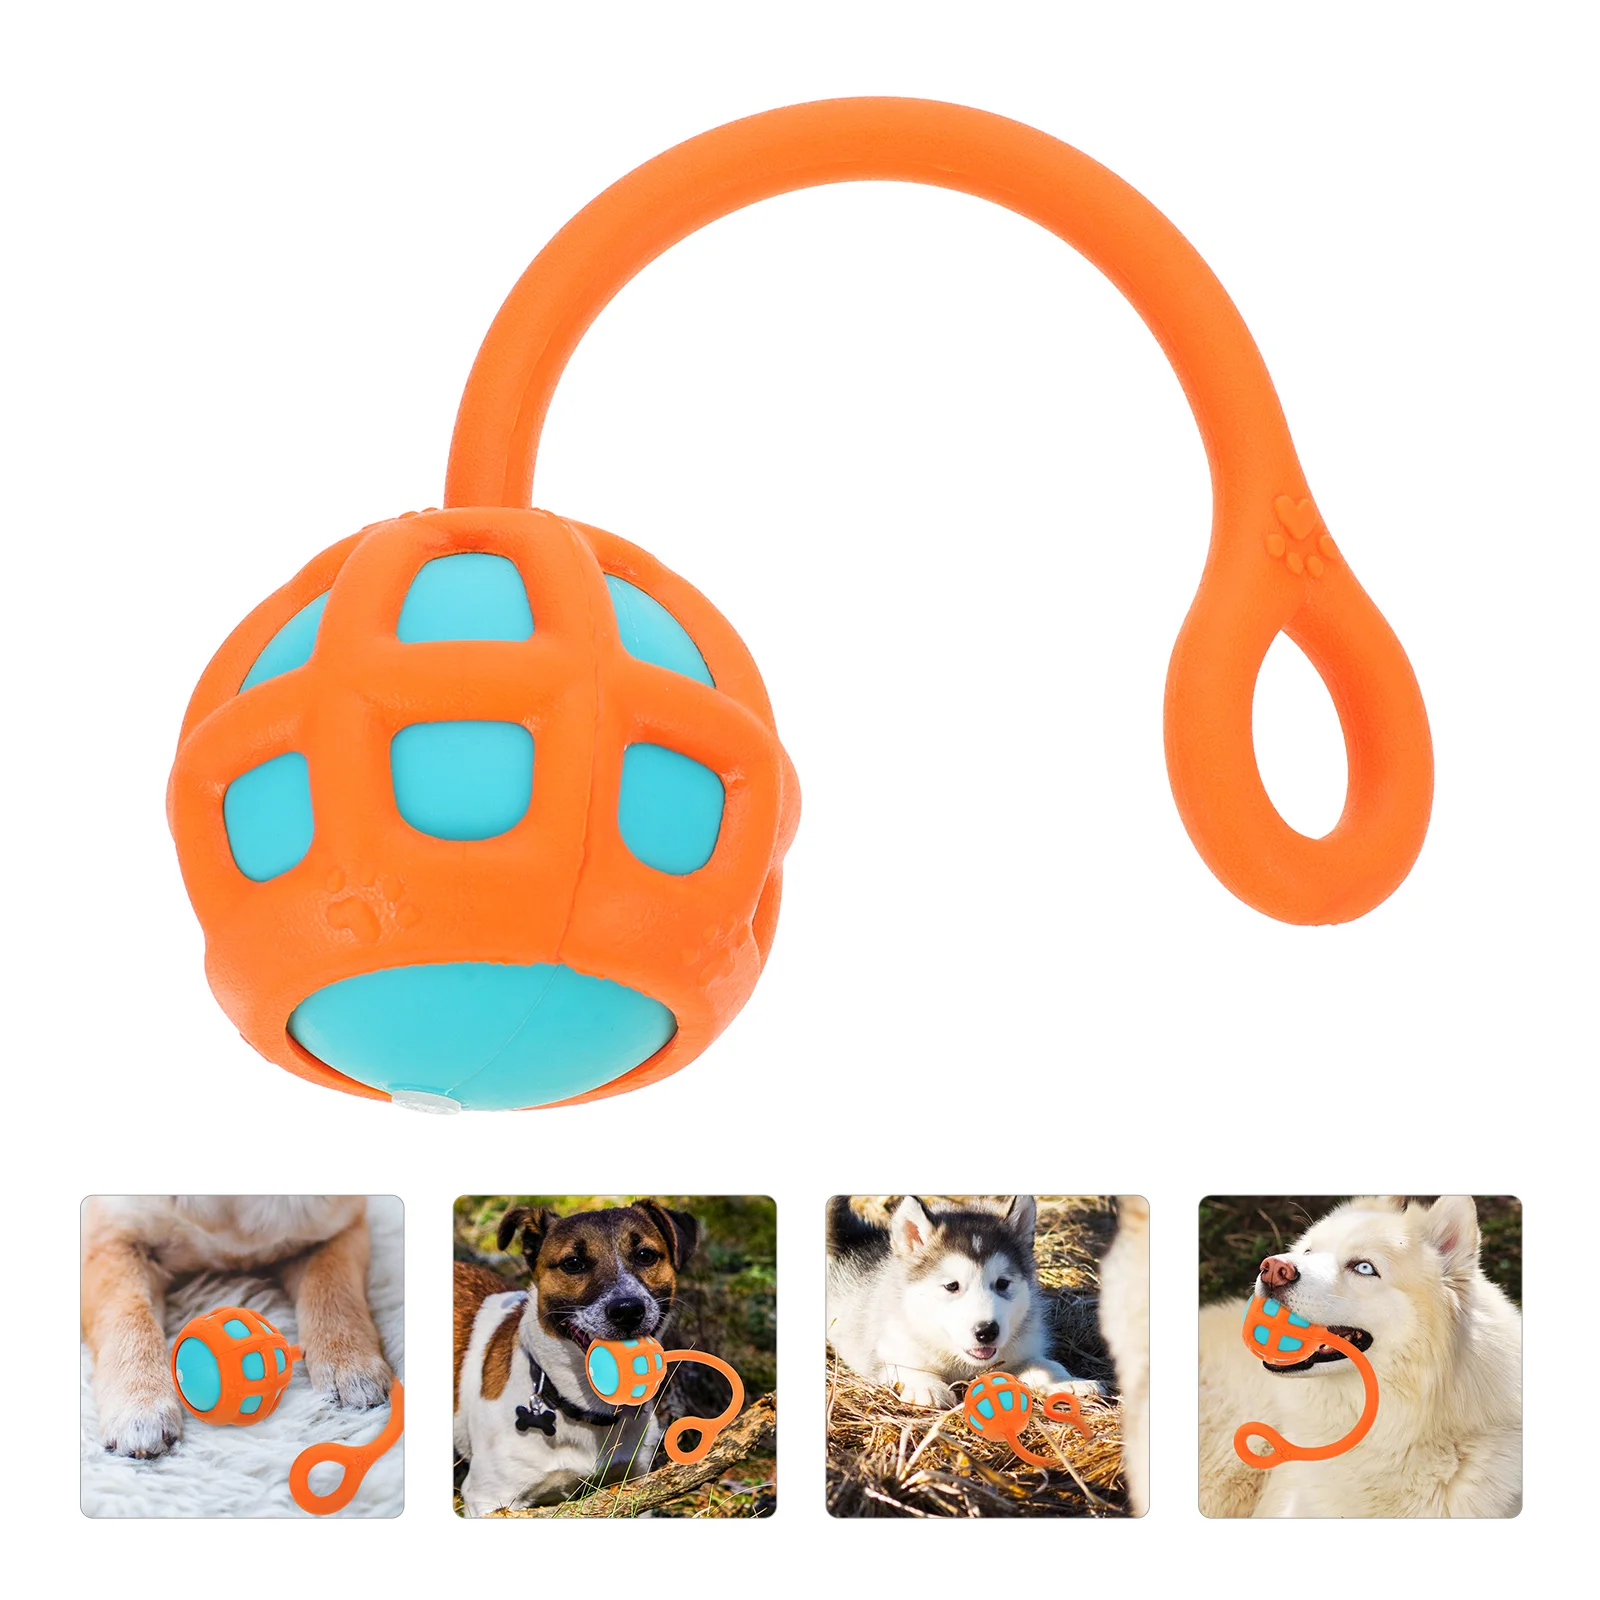 

Dog Toy Toys Pet Chew Puppy Rope Interactive Tug Training Chewing Aggressive Teething Bite Cat Dogs Teeth Chewers Molar Cleaning